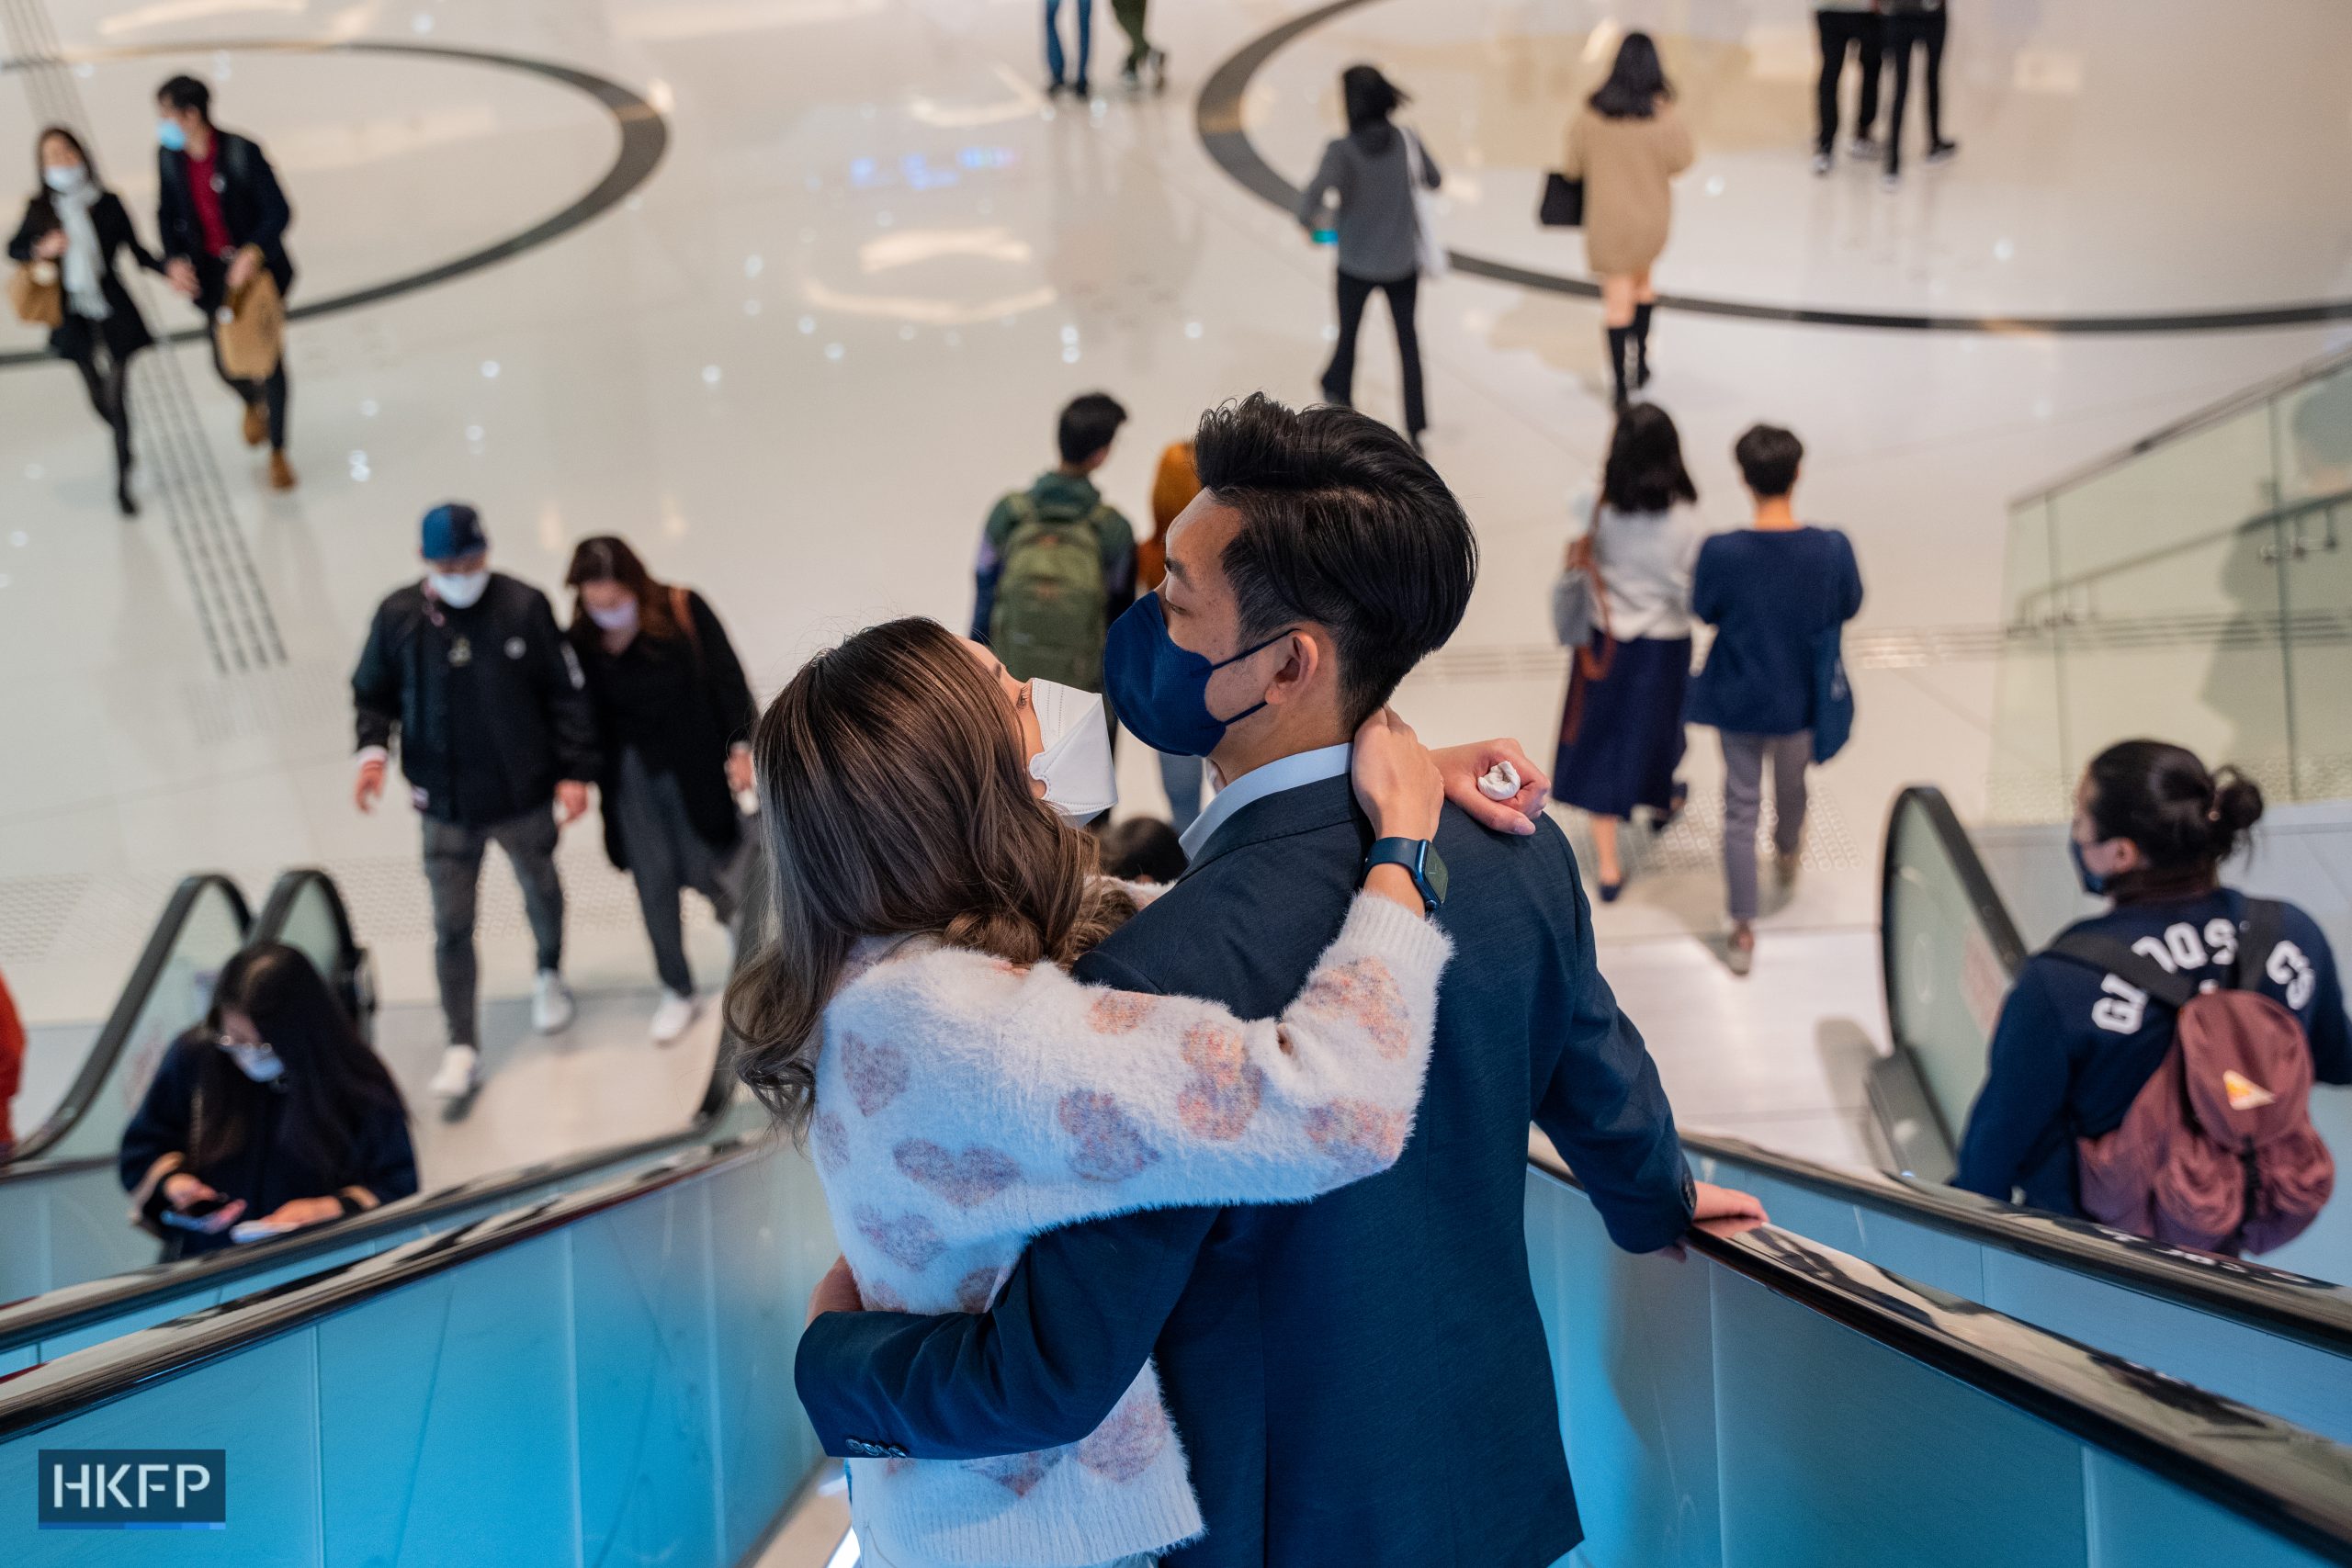 A couple kiss in a shopping mall on February 14, 2023, the valentine’s day. Government lifted the Covid-19 mask mandate on March 1, 2023. Photo: Kyle Lam/HKFP.